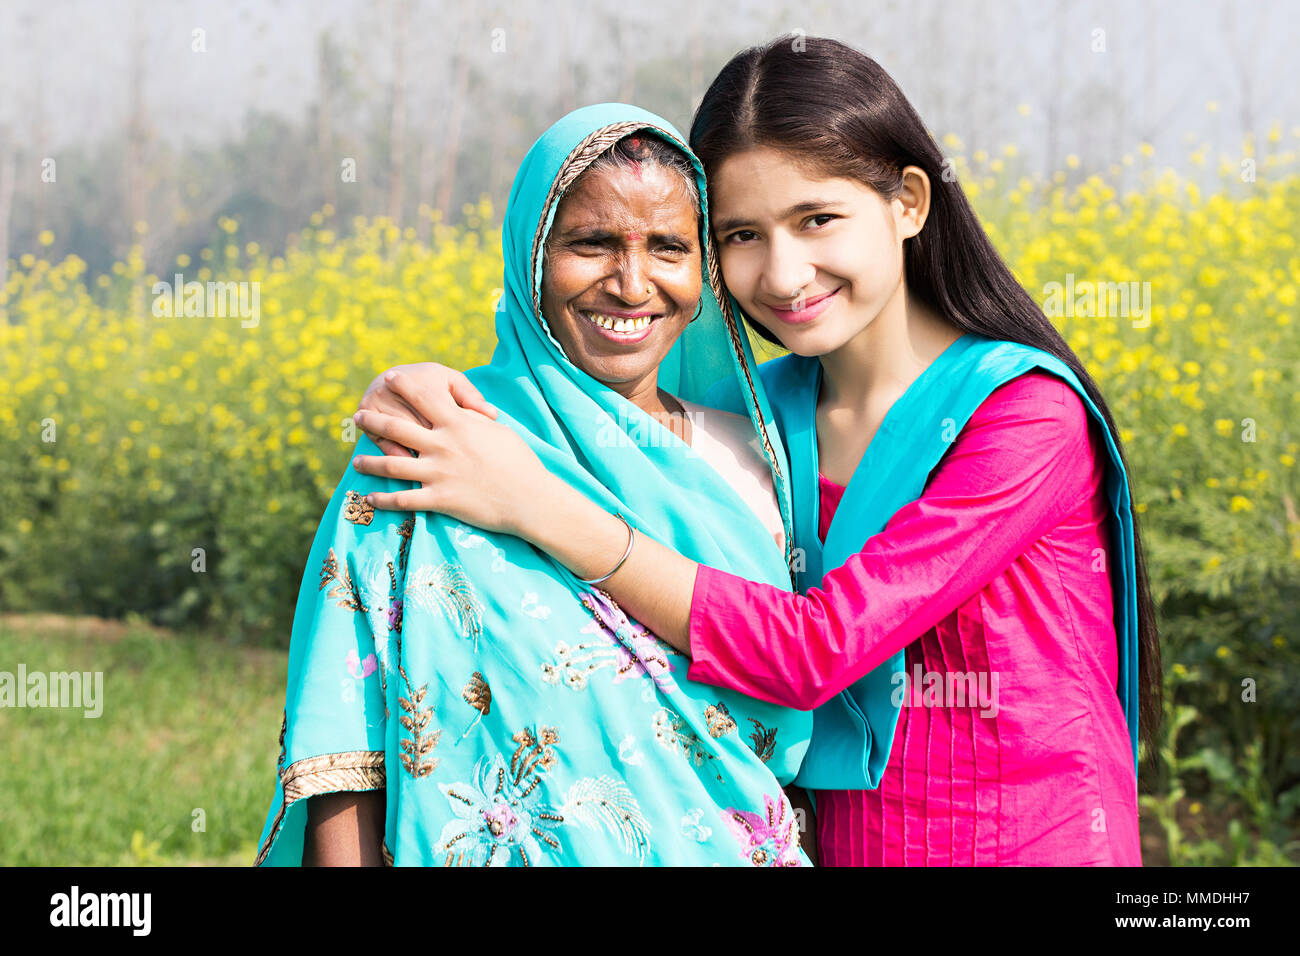 Happy Rural Villager Mother And Teenage Daughter Together In-Farm Village Stock Photo